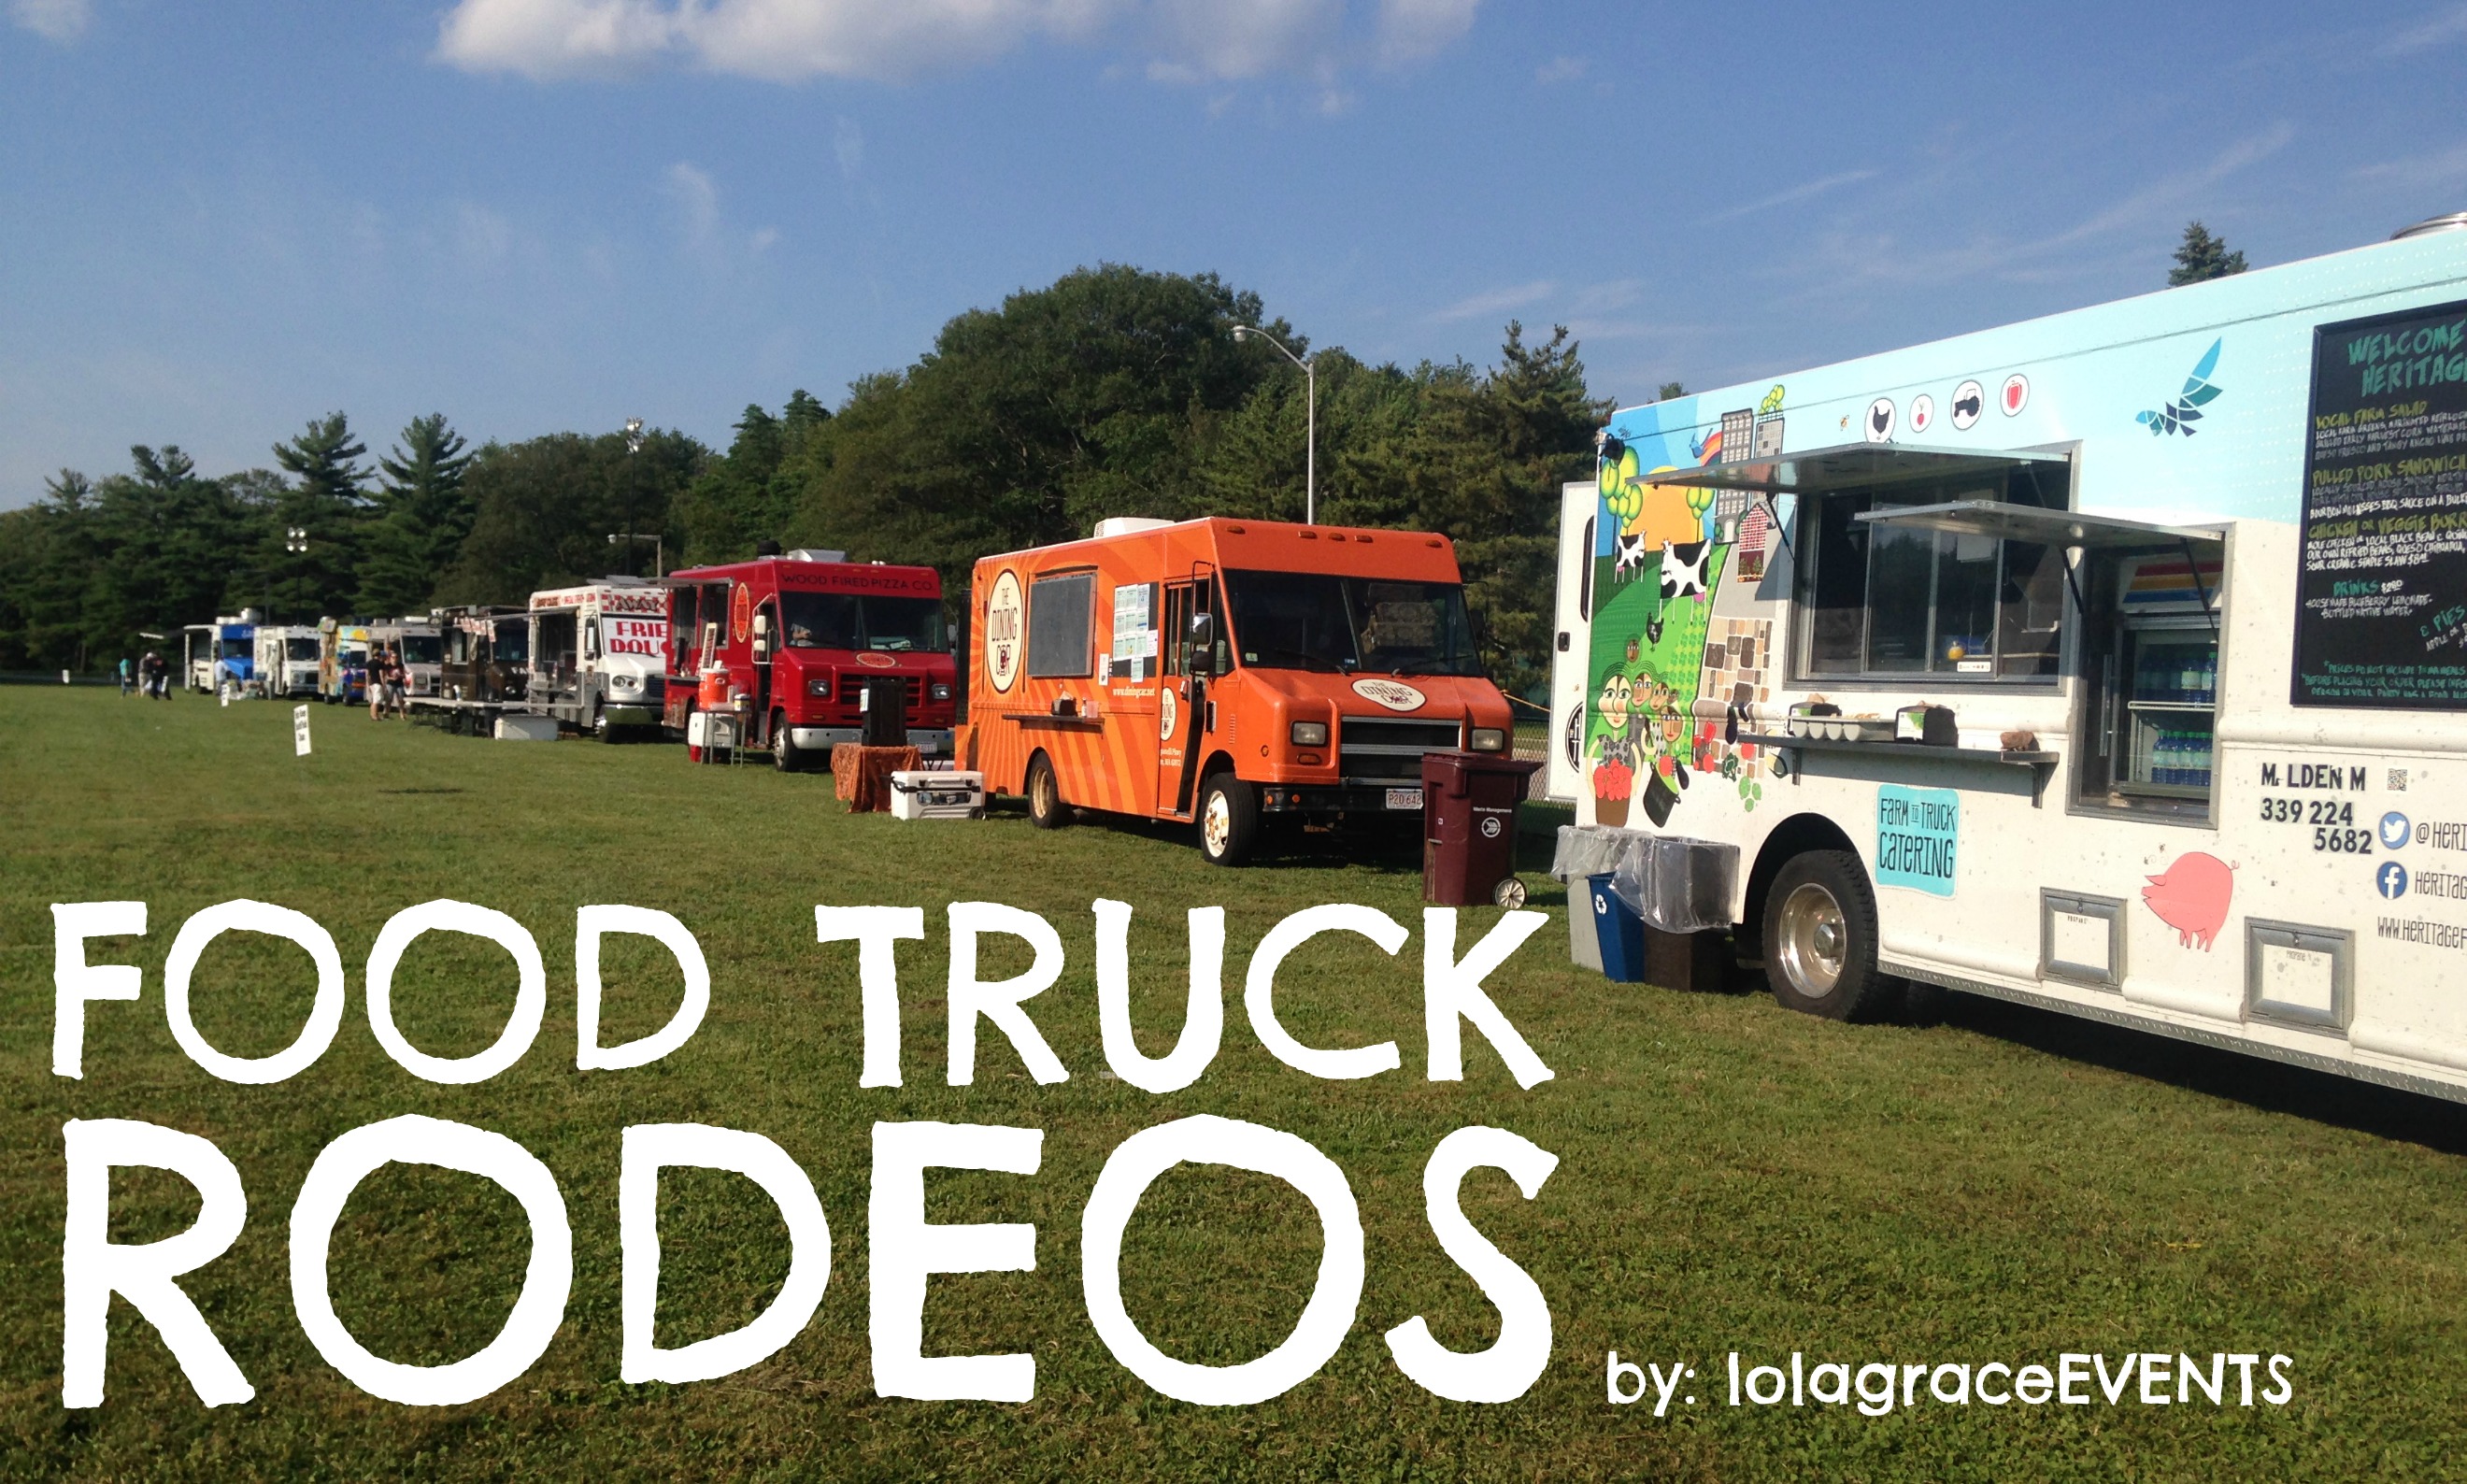 food truck rodeos